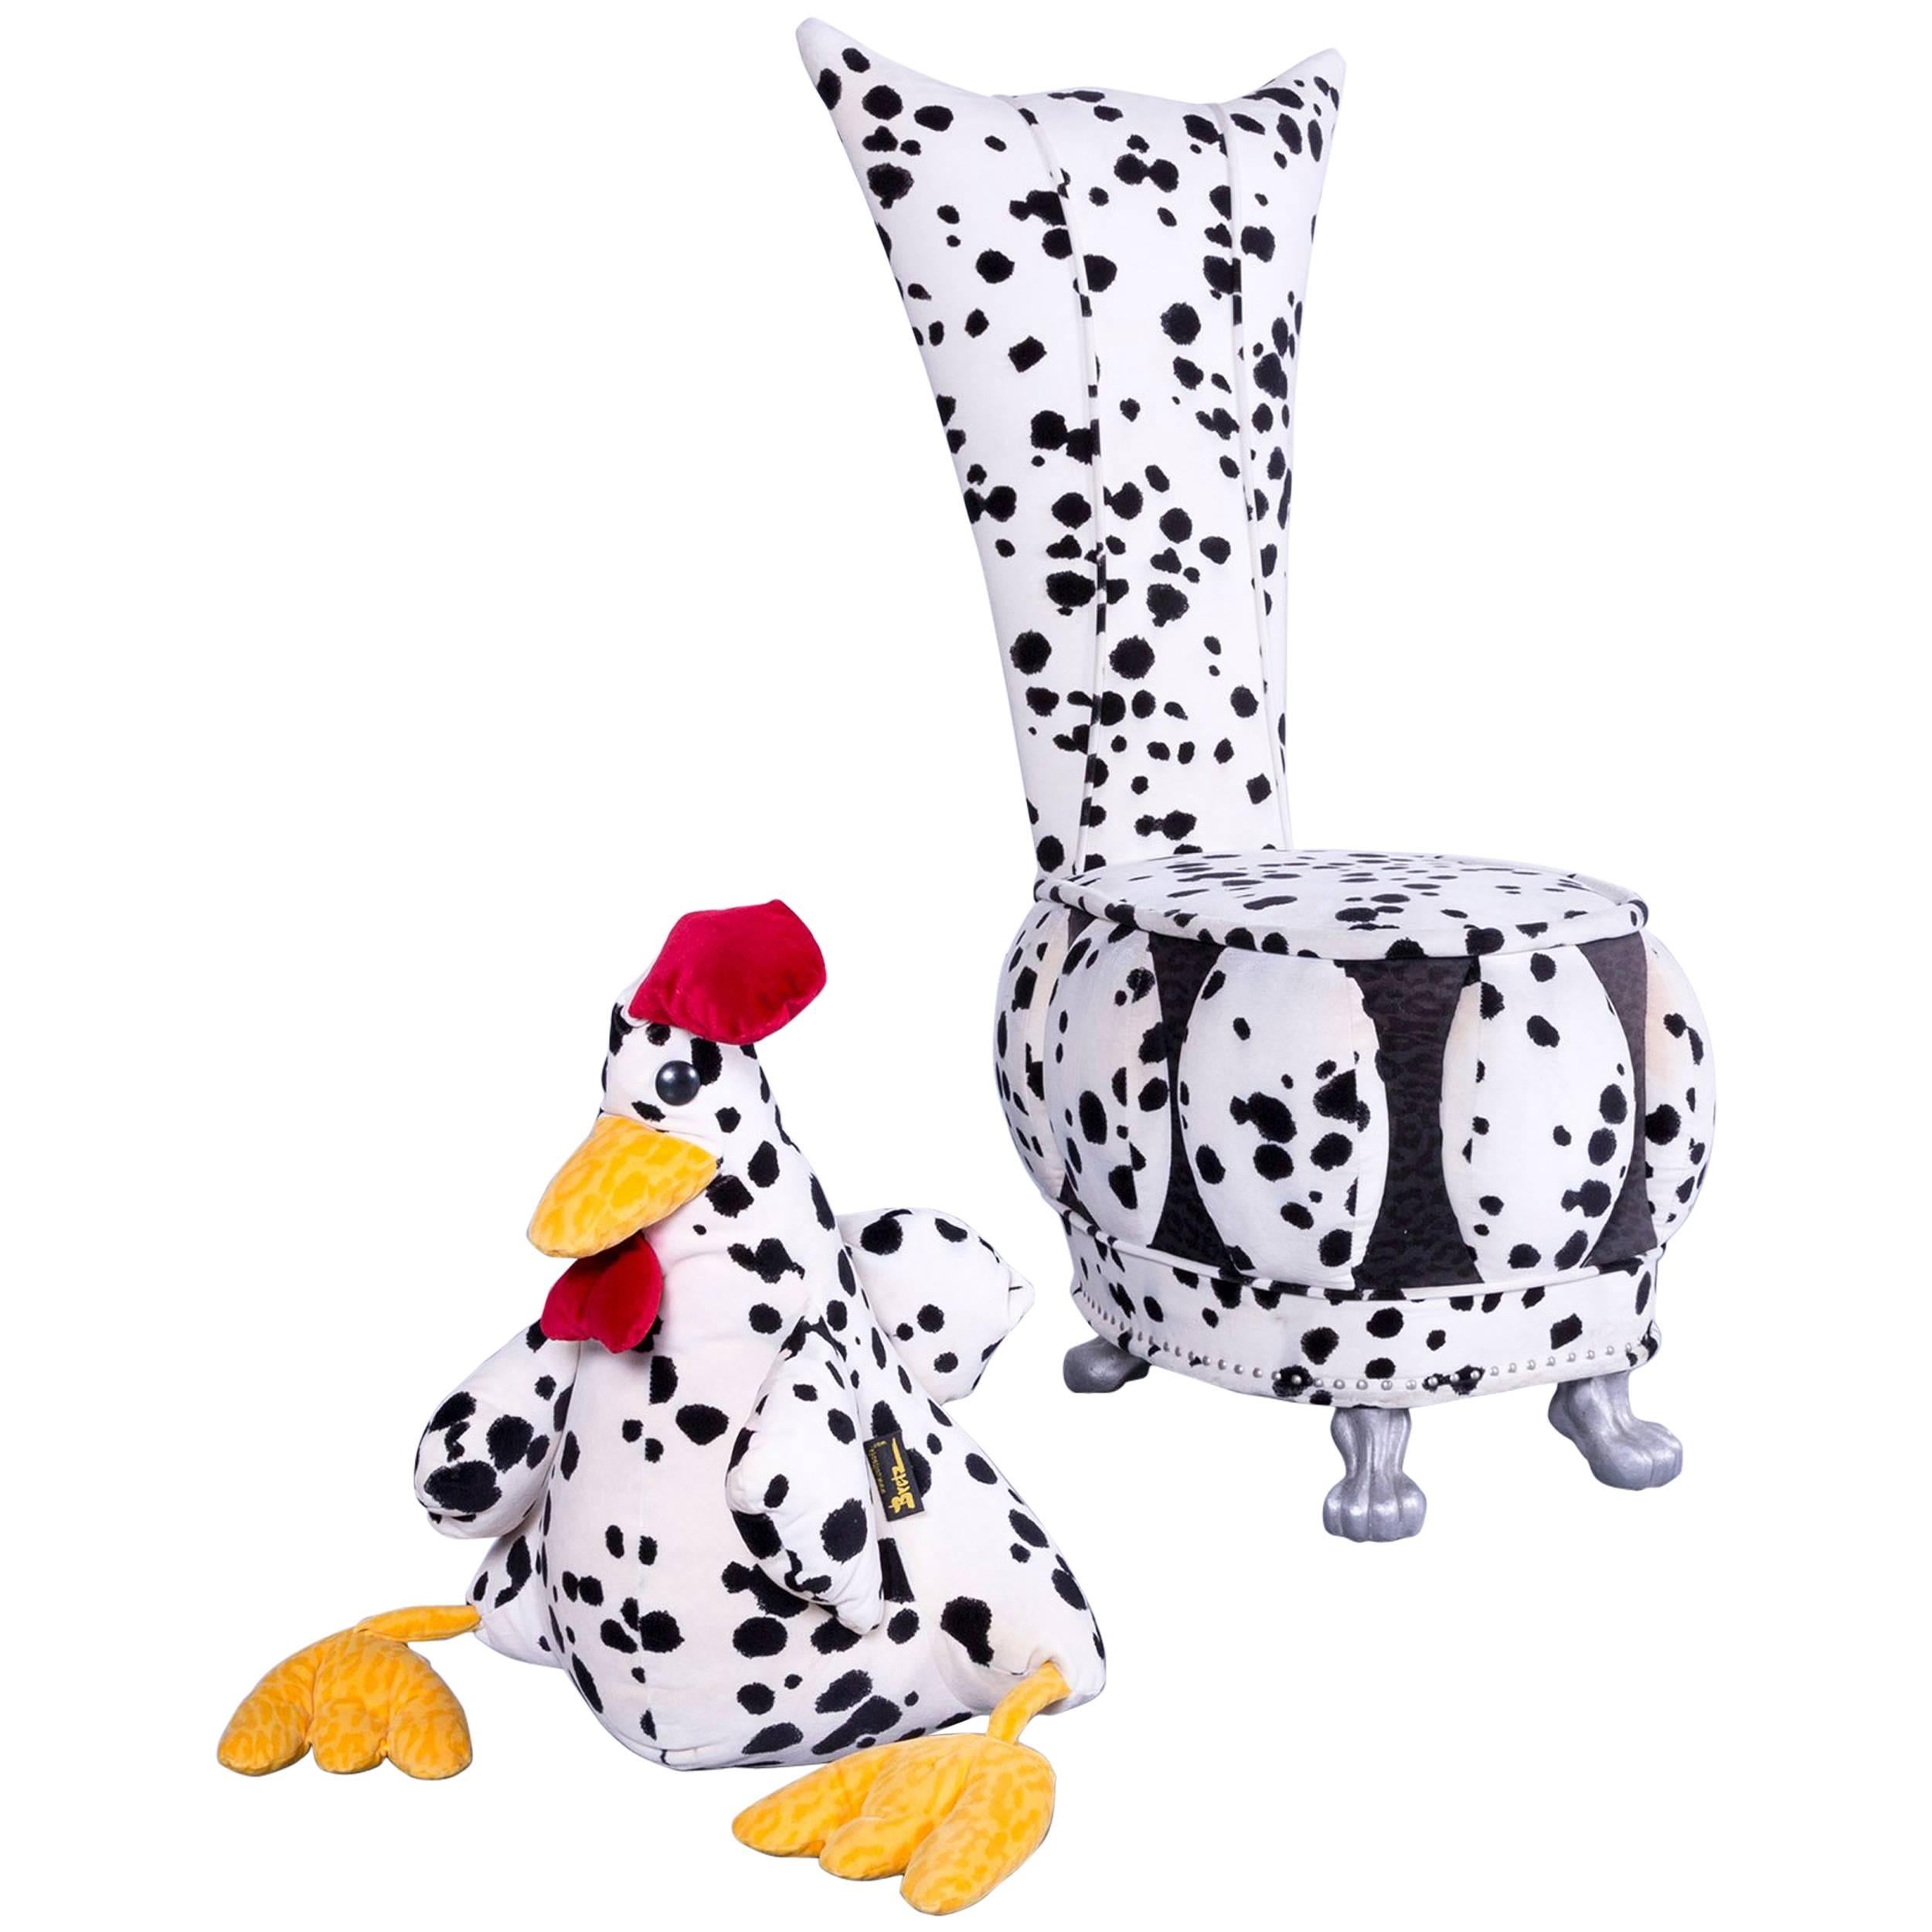 Bretz Designer Chair in White Dalmatiner Patterned Fabric with Chicken Pillow